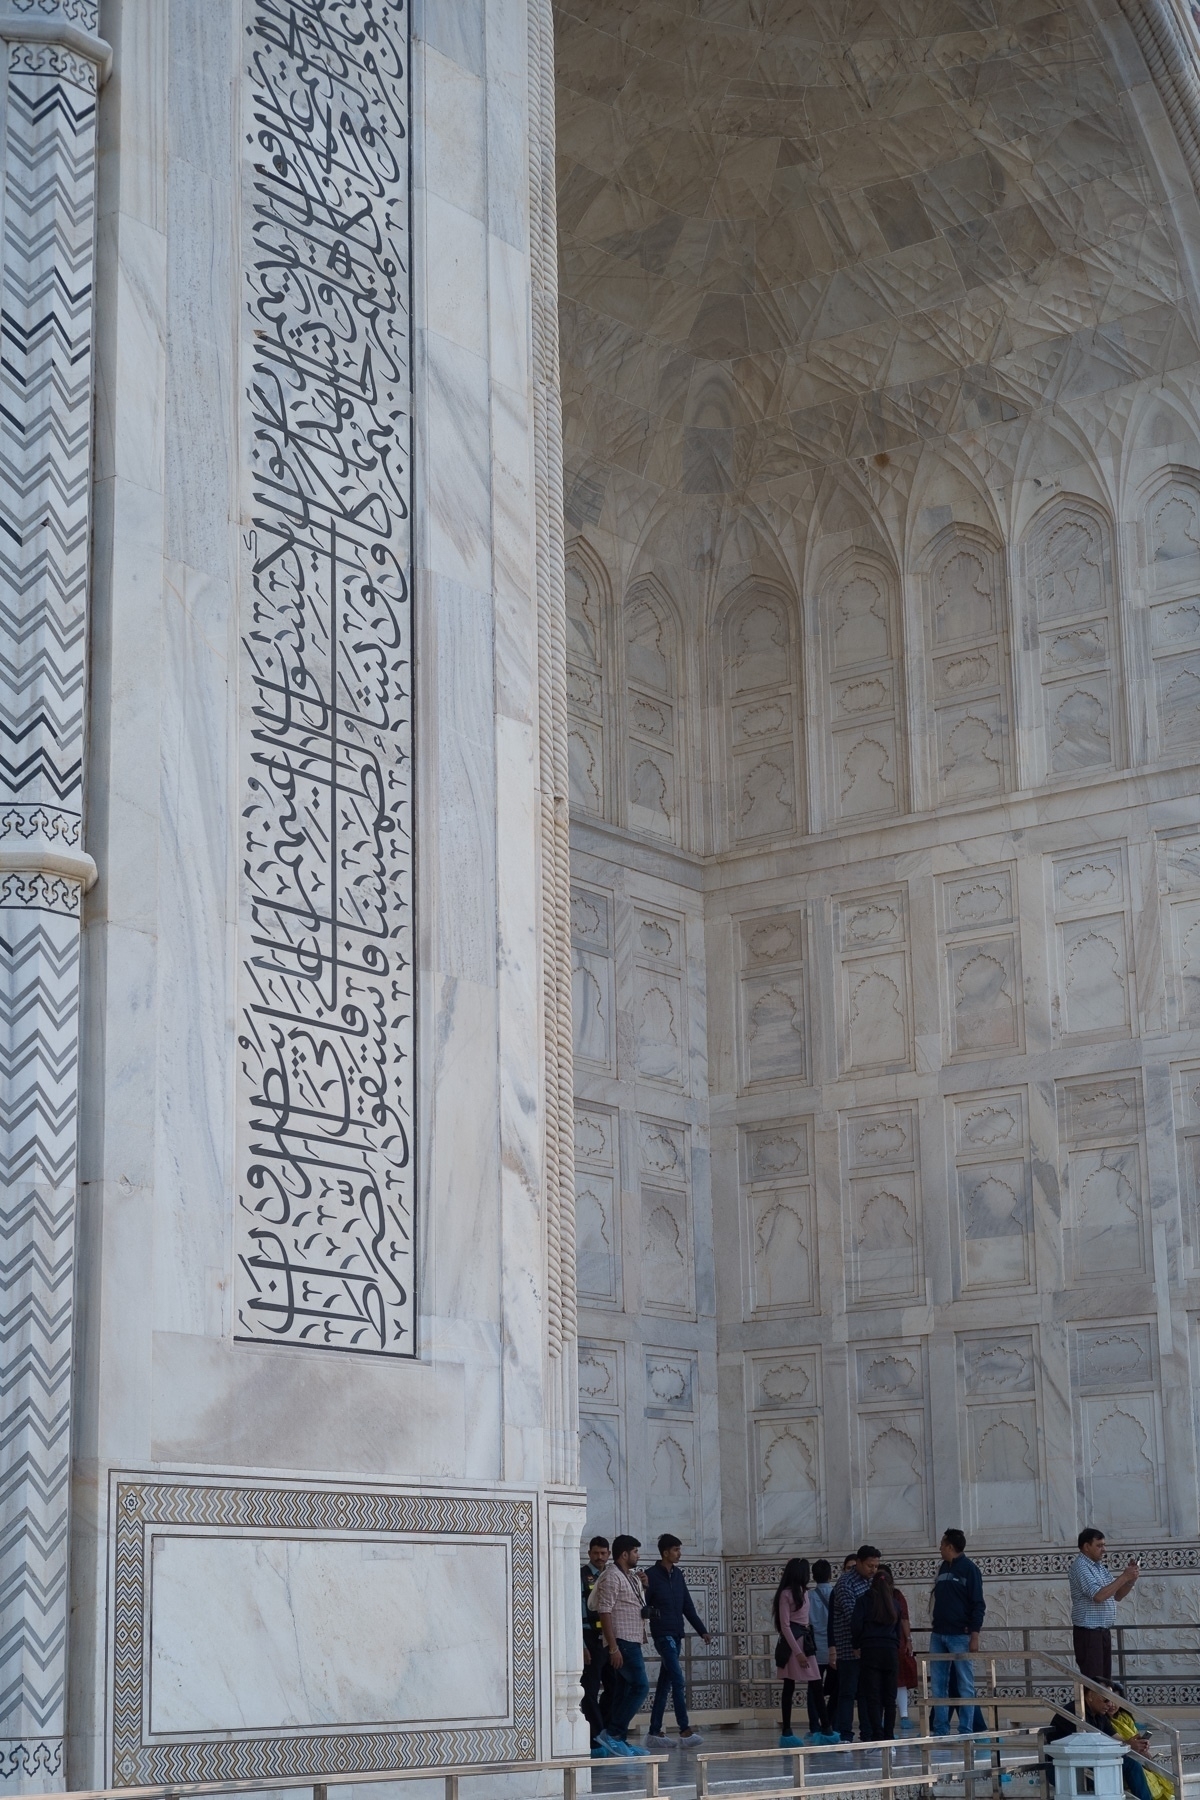 Main arch on the back of the Taj Mahal with inscriptions around it, and relief carvings on the inside.